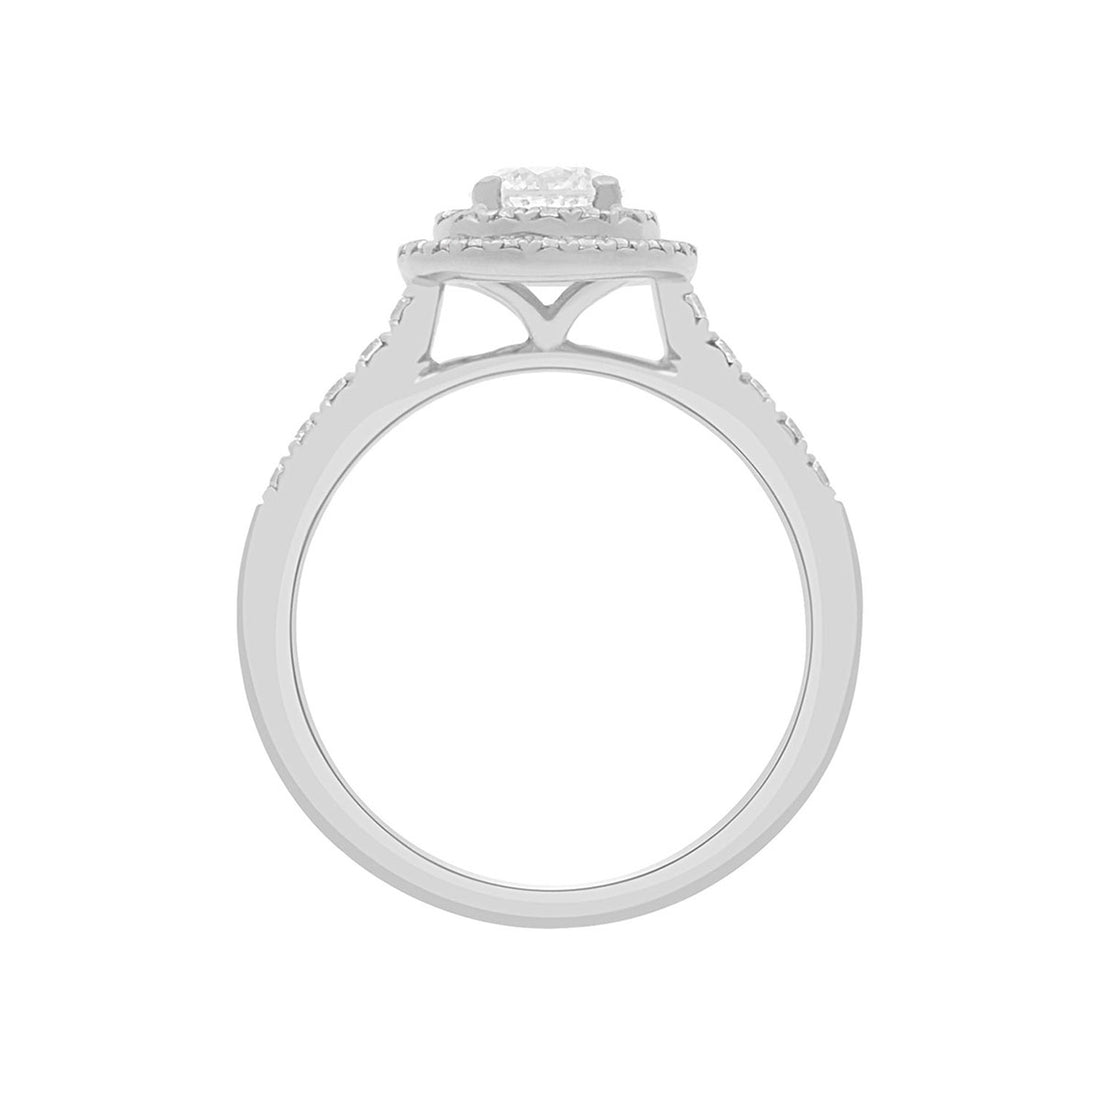 Round Double Halo Engagement Ring in white gold standing upright